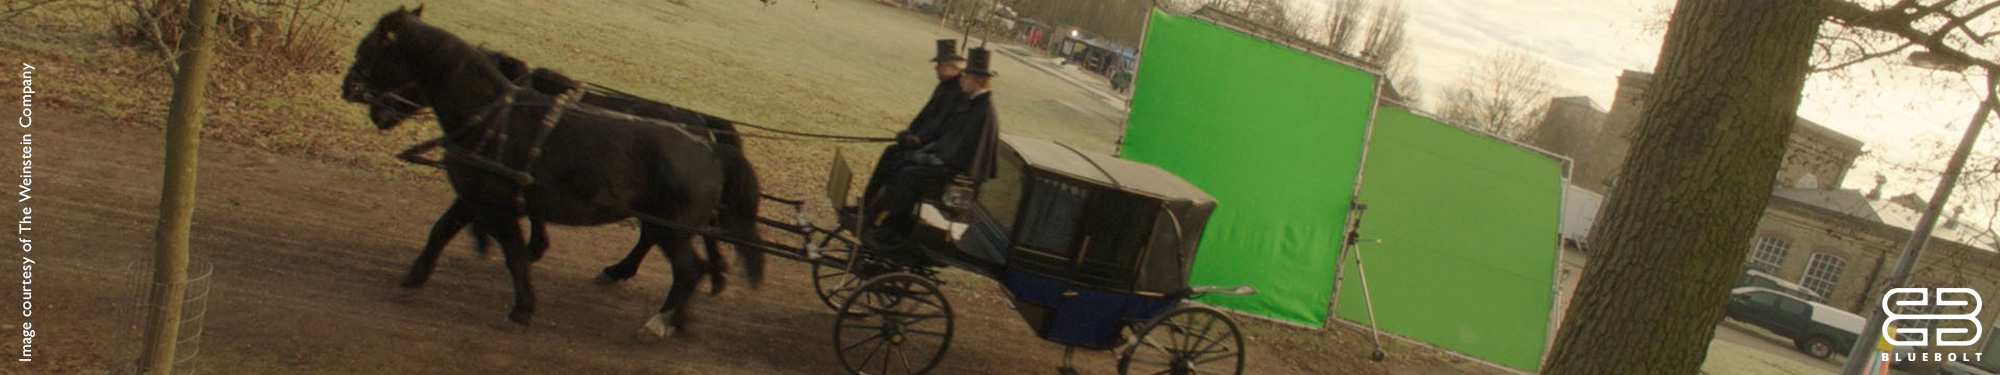 Film set with horse-drawn carriage in front of a green screen